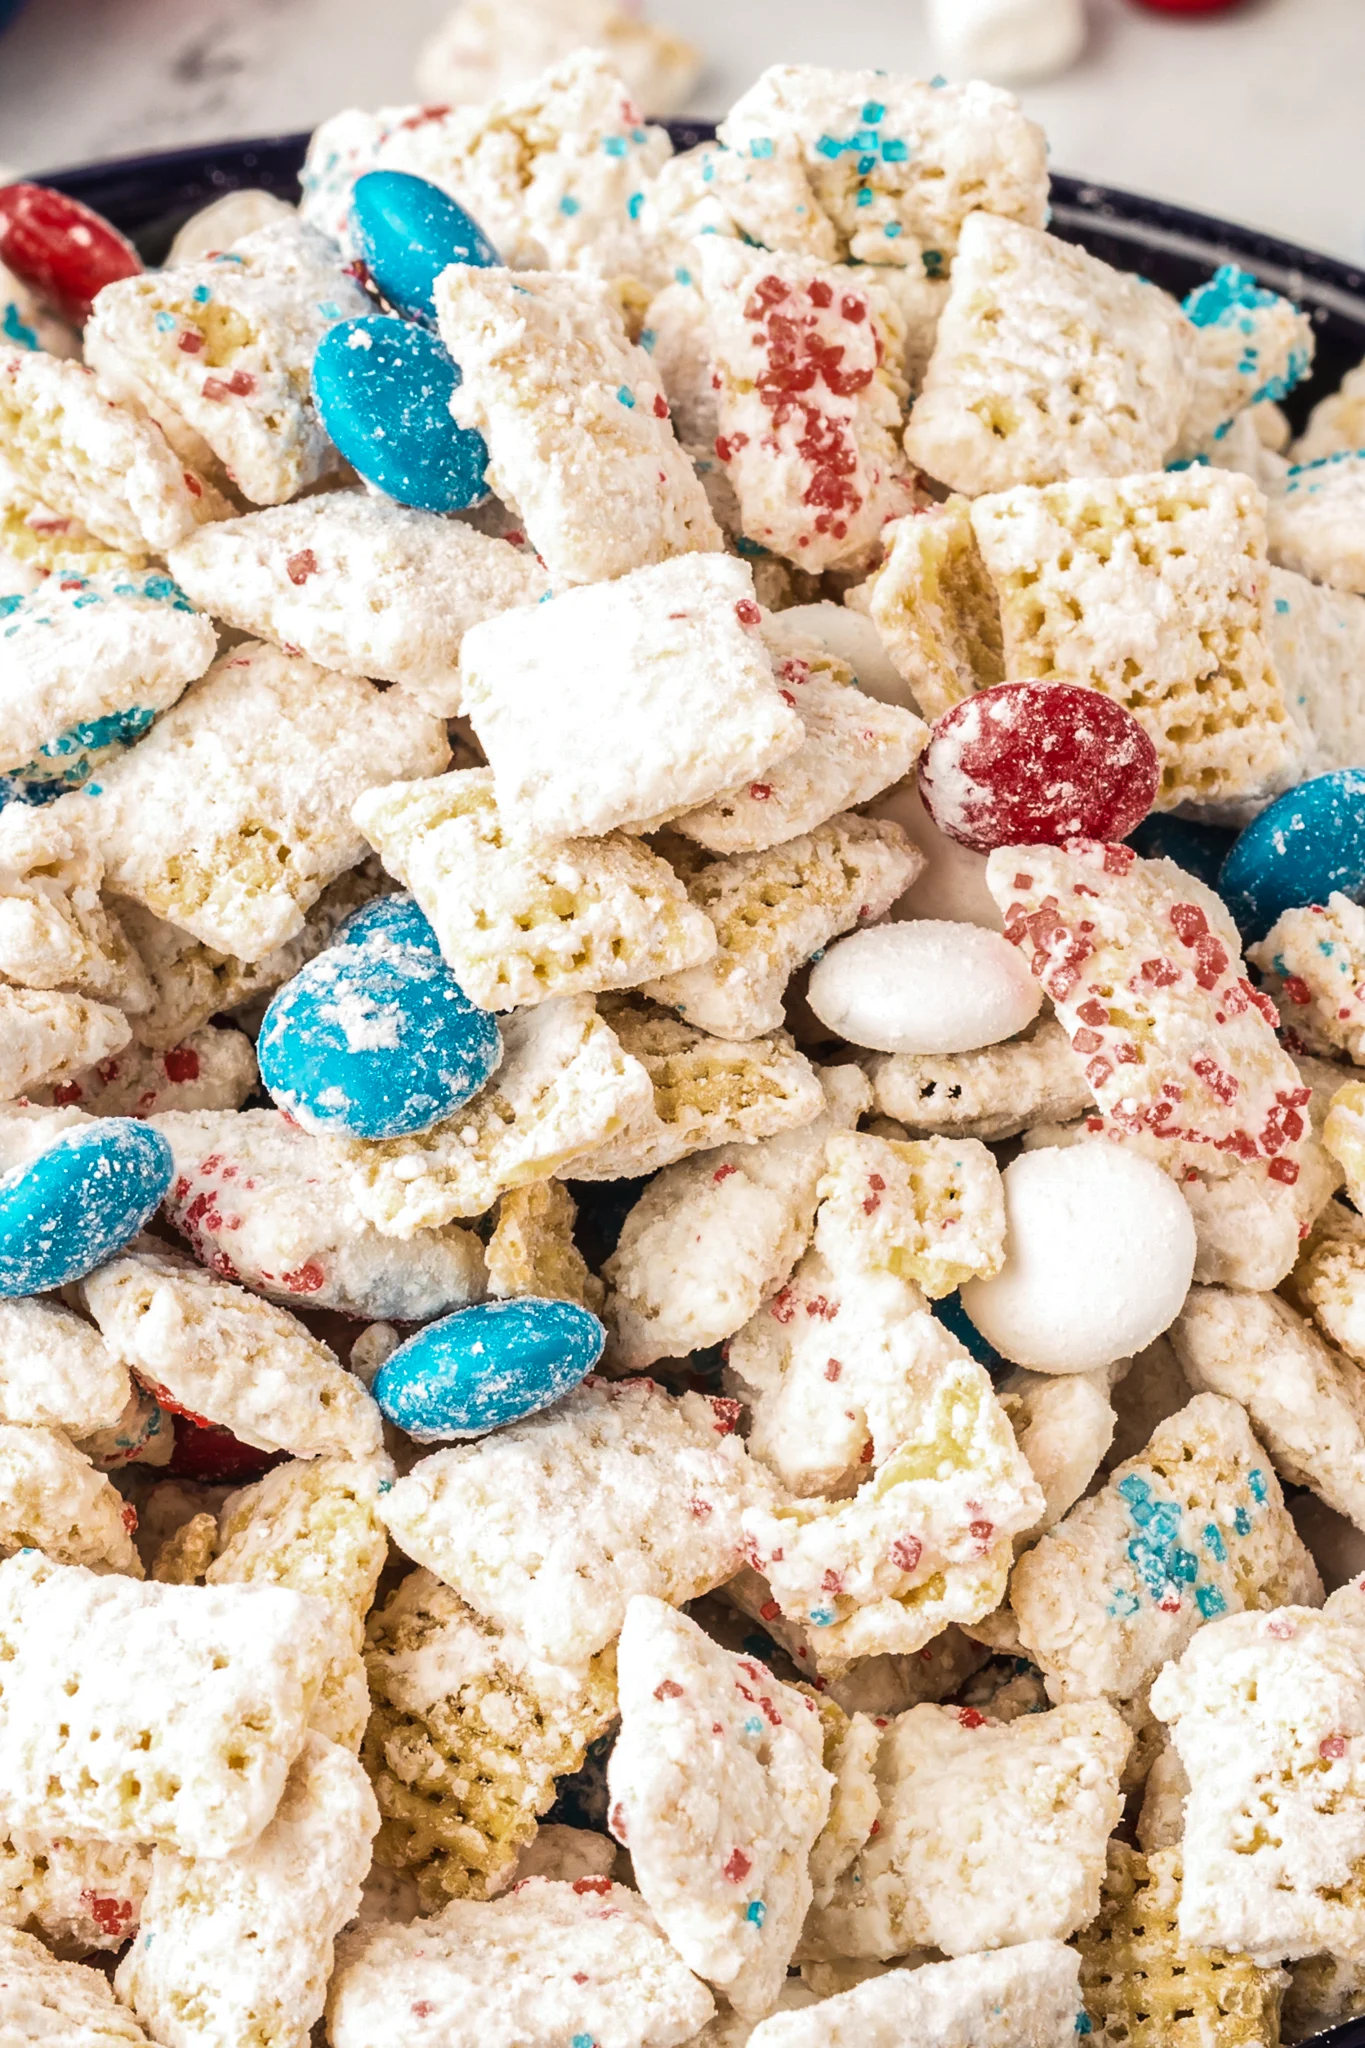 A close up shot of white chocolate puppy chow with M&M's